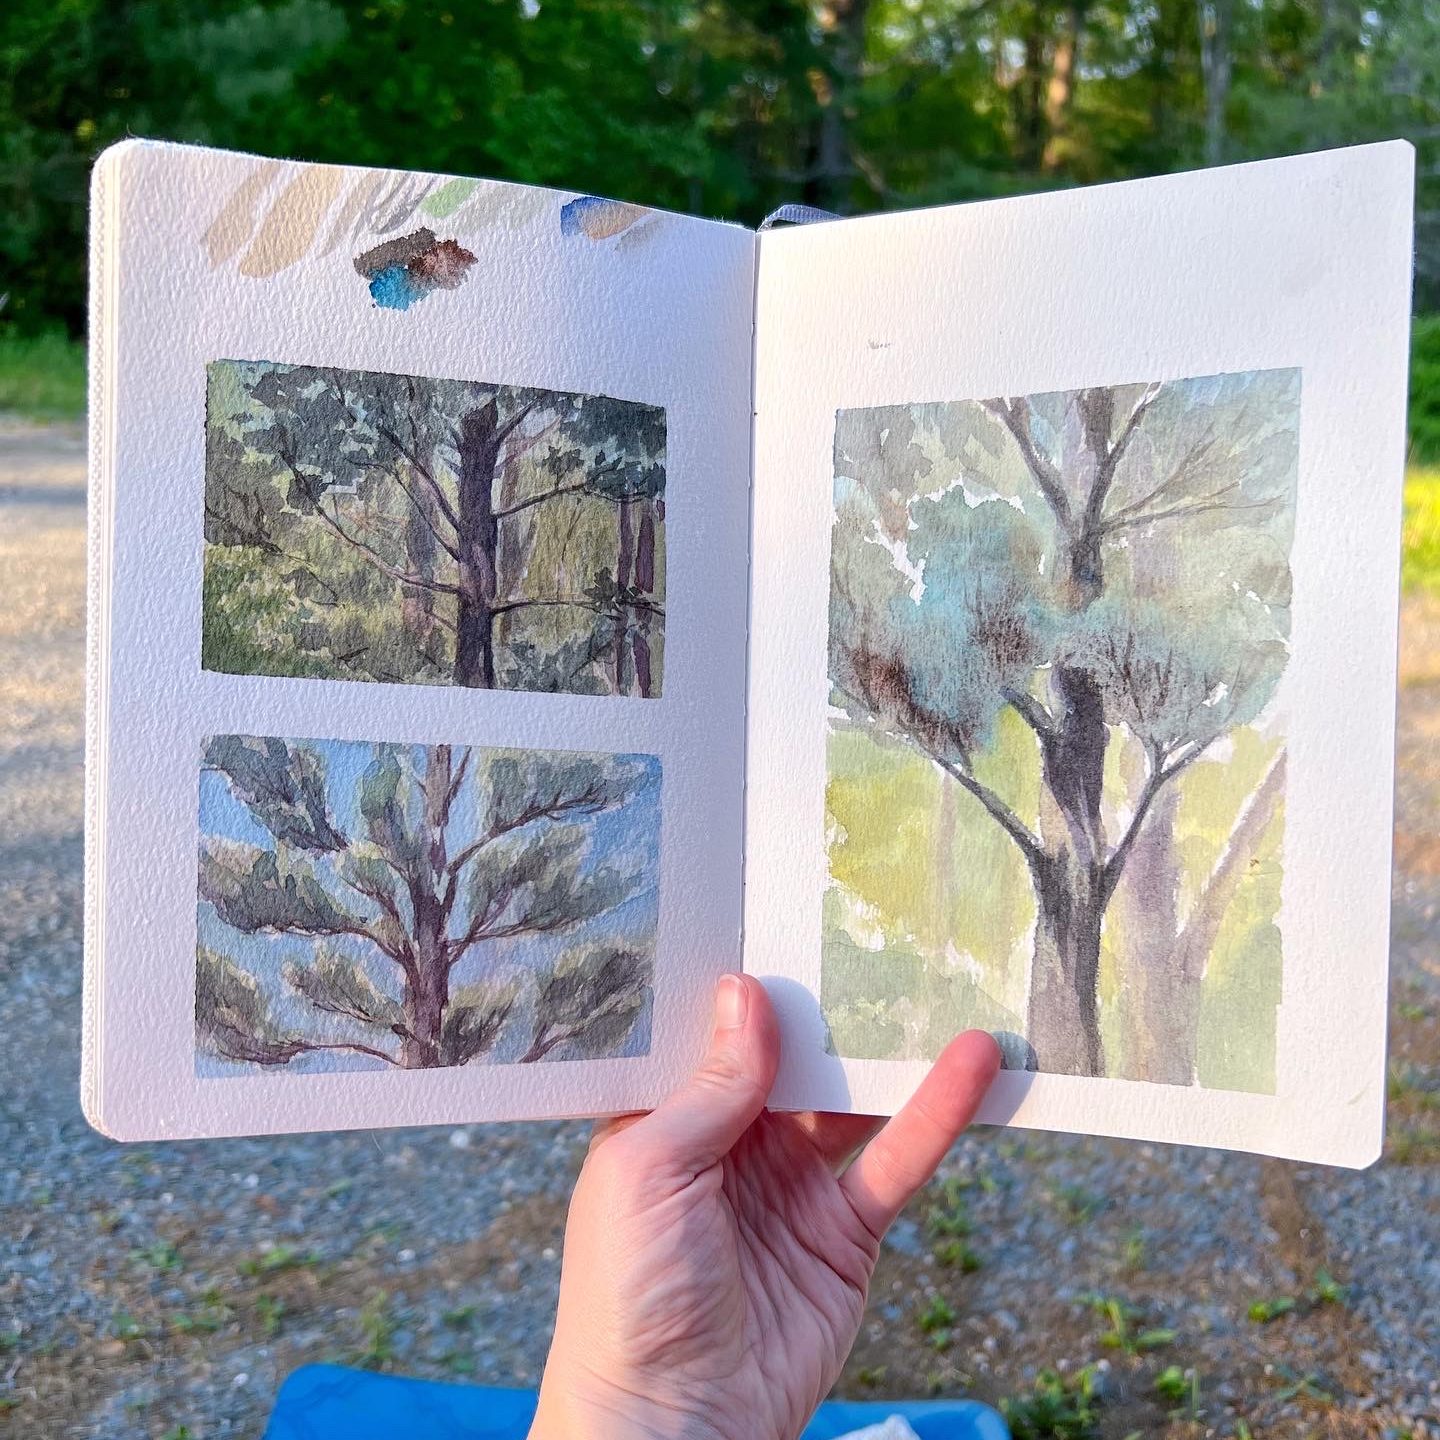 Jill holding out an open sketchbook with 3 pine tree painted thumbnail sketches.